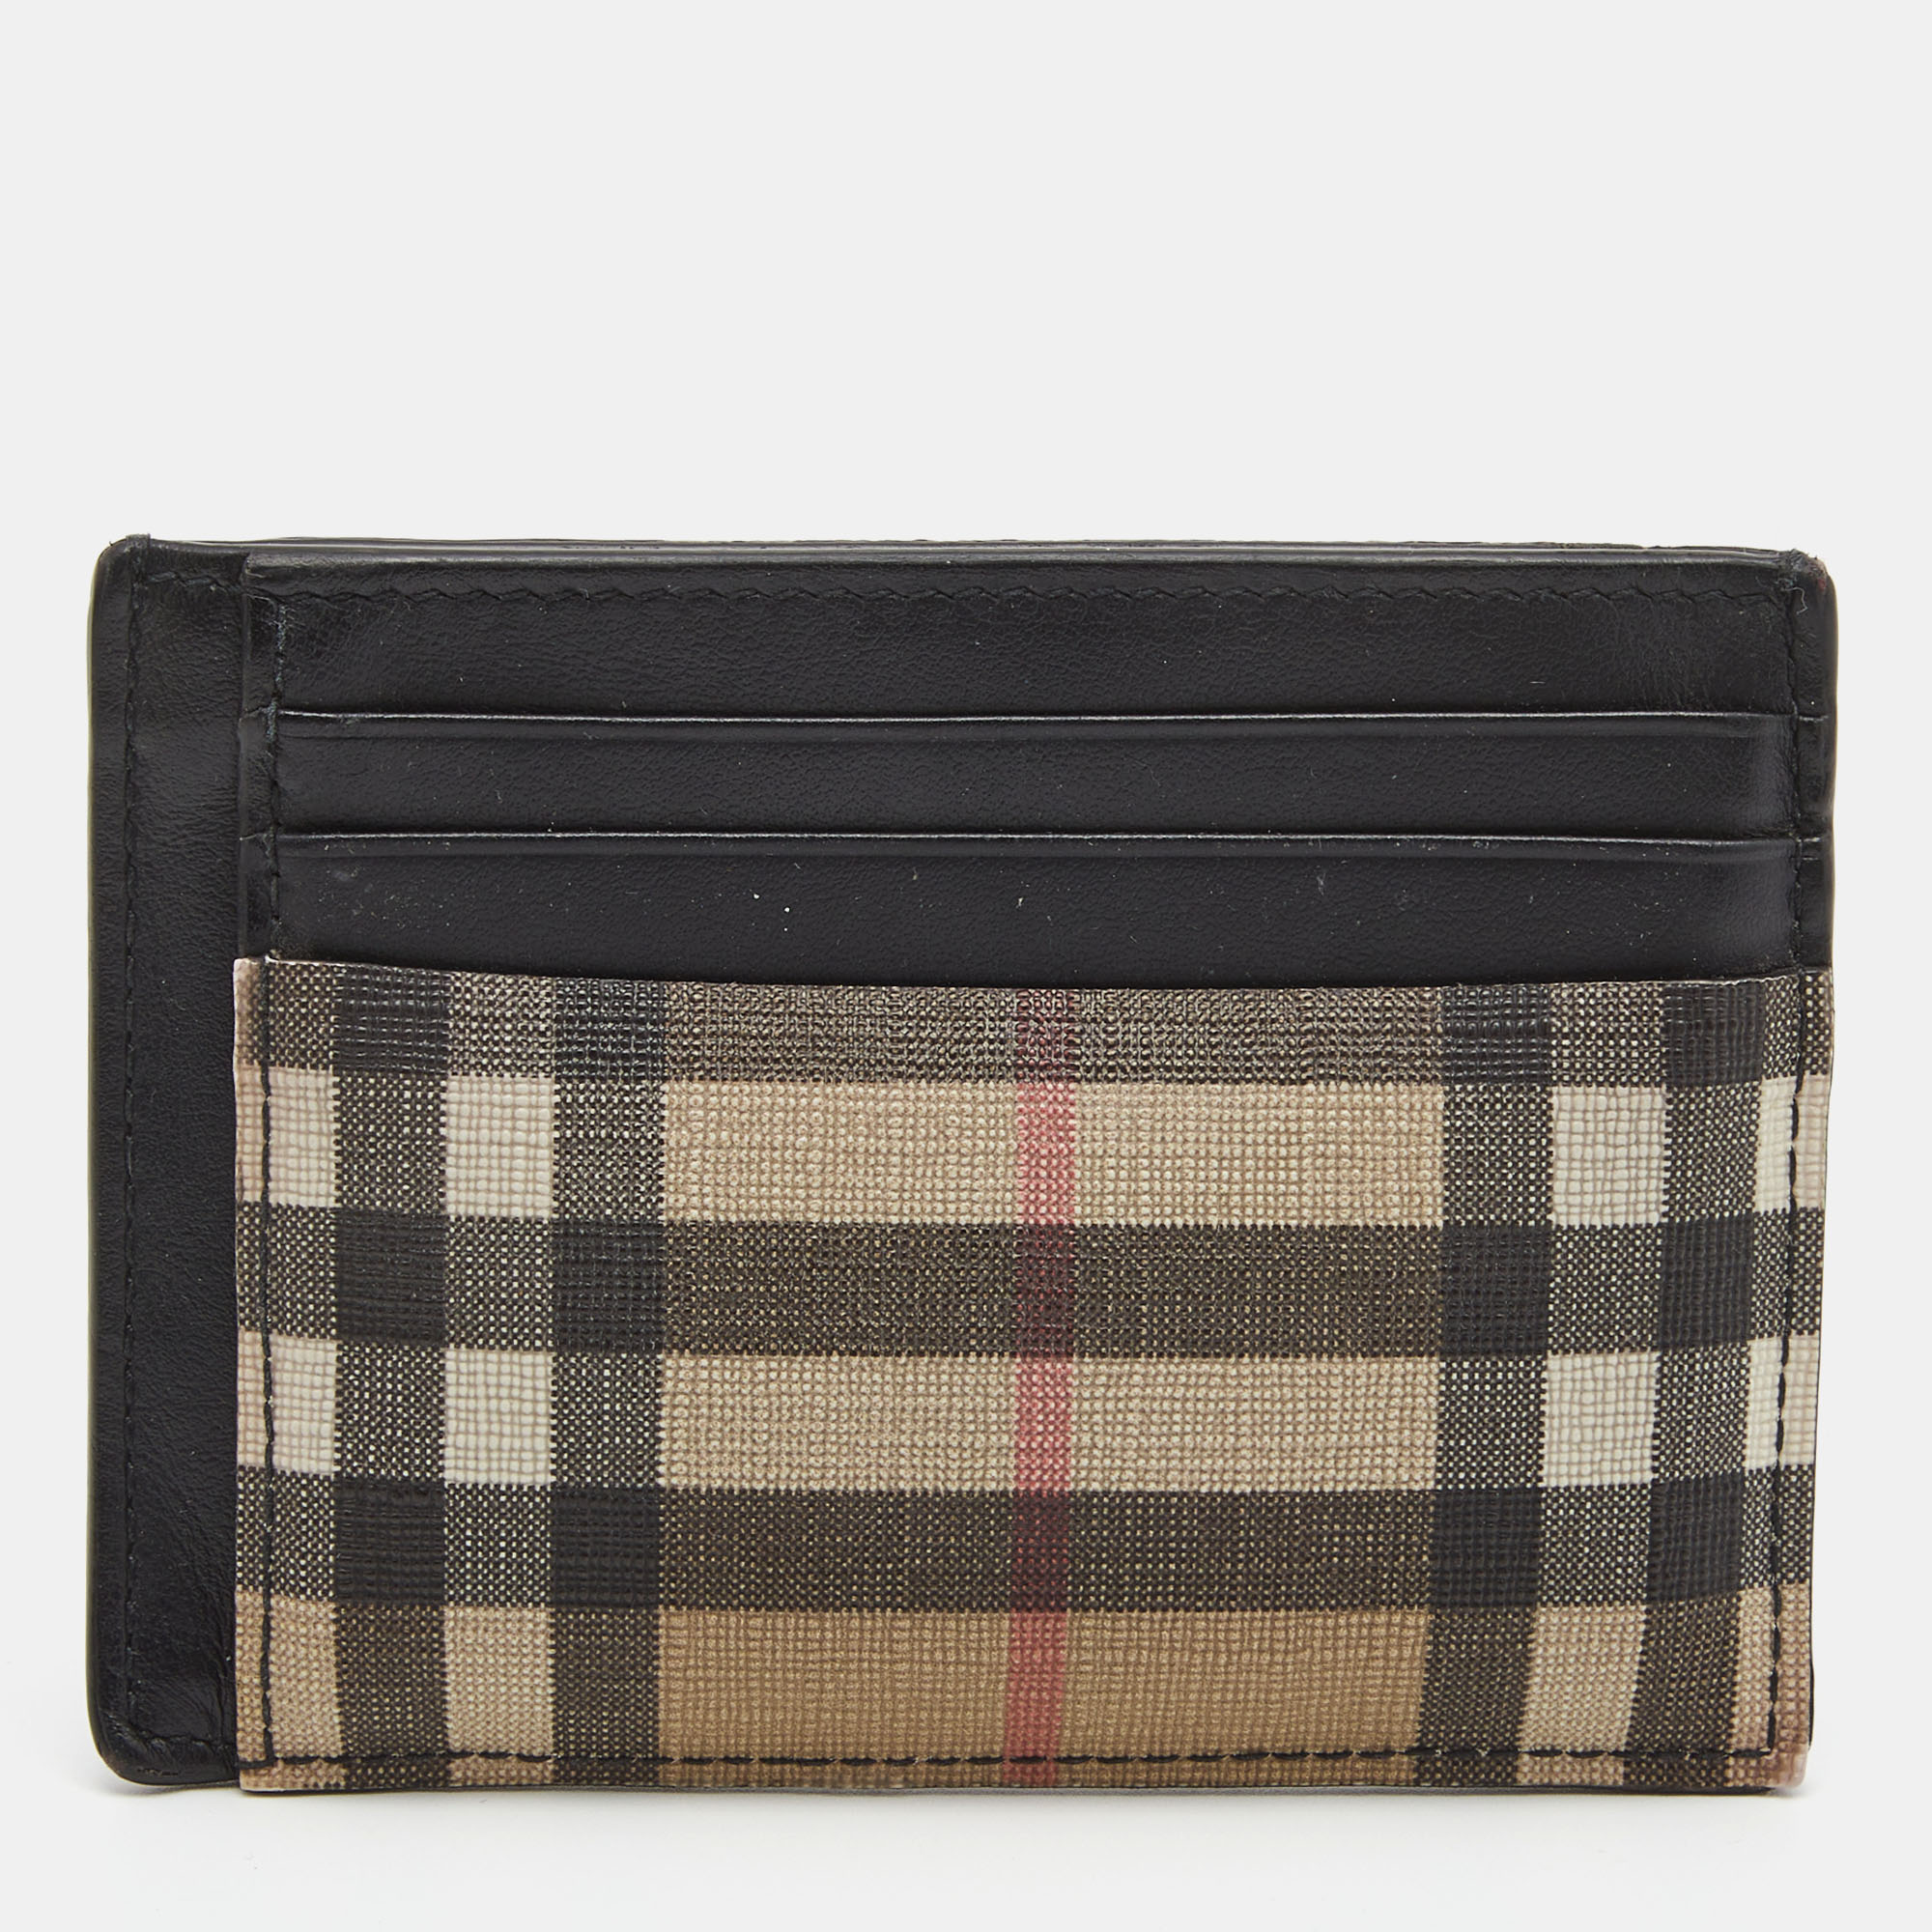 BURBERRY Check And Leather Money Clip Card Case